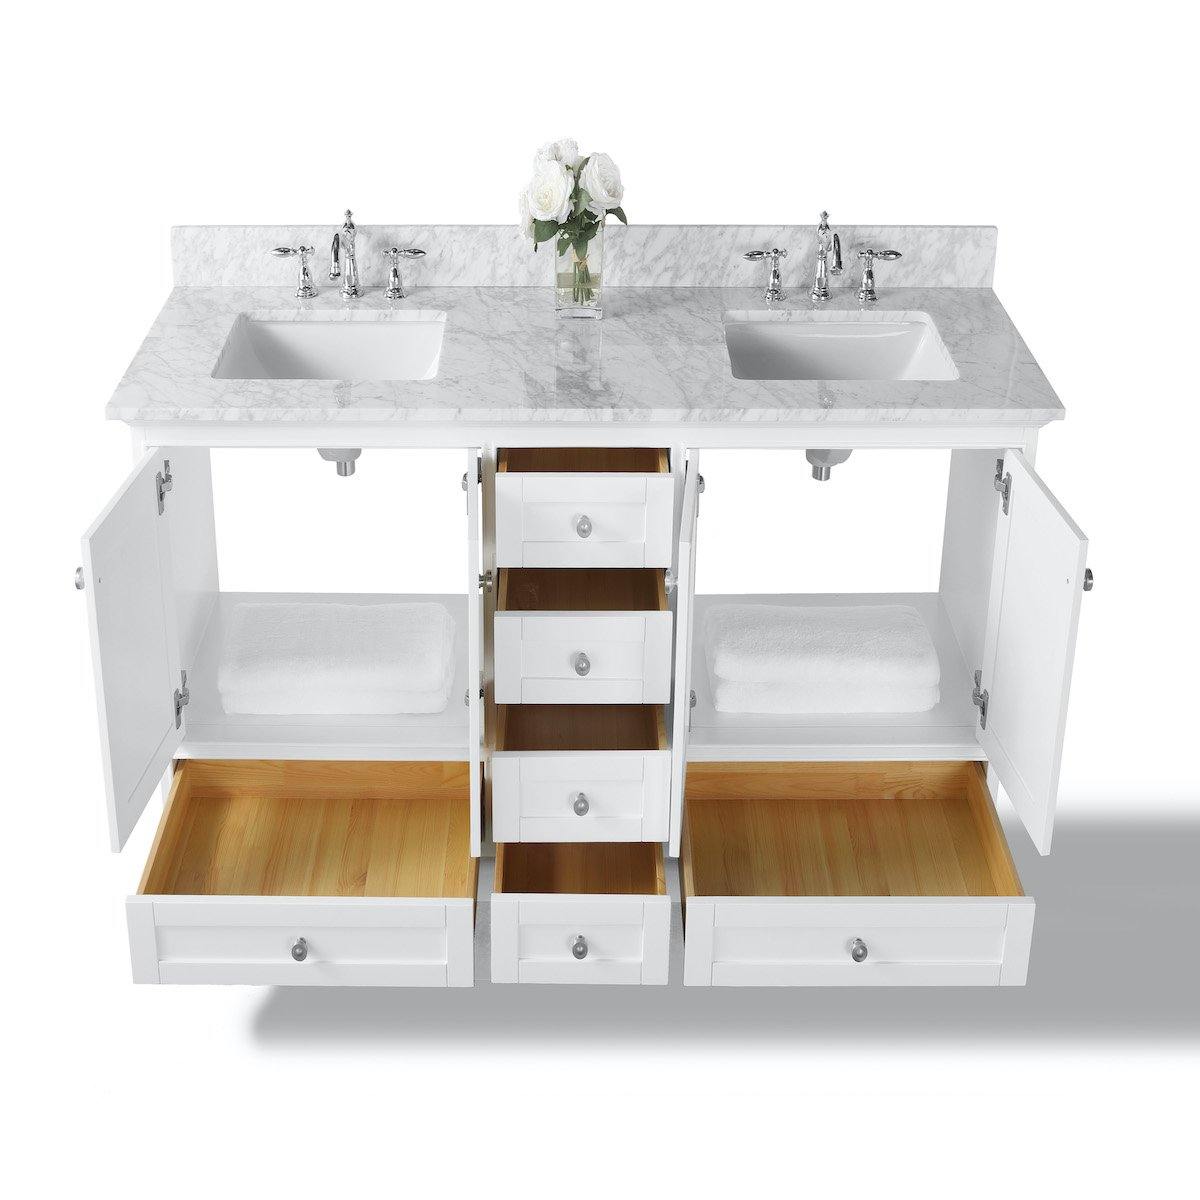 Ancerre Designs Audrey 72 Inch White Double Vanity Inside